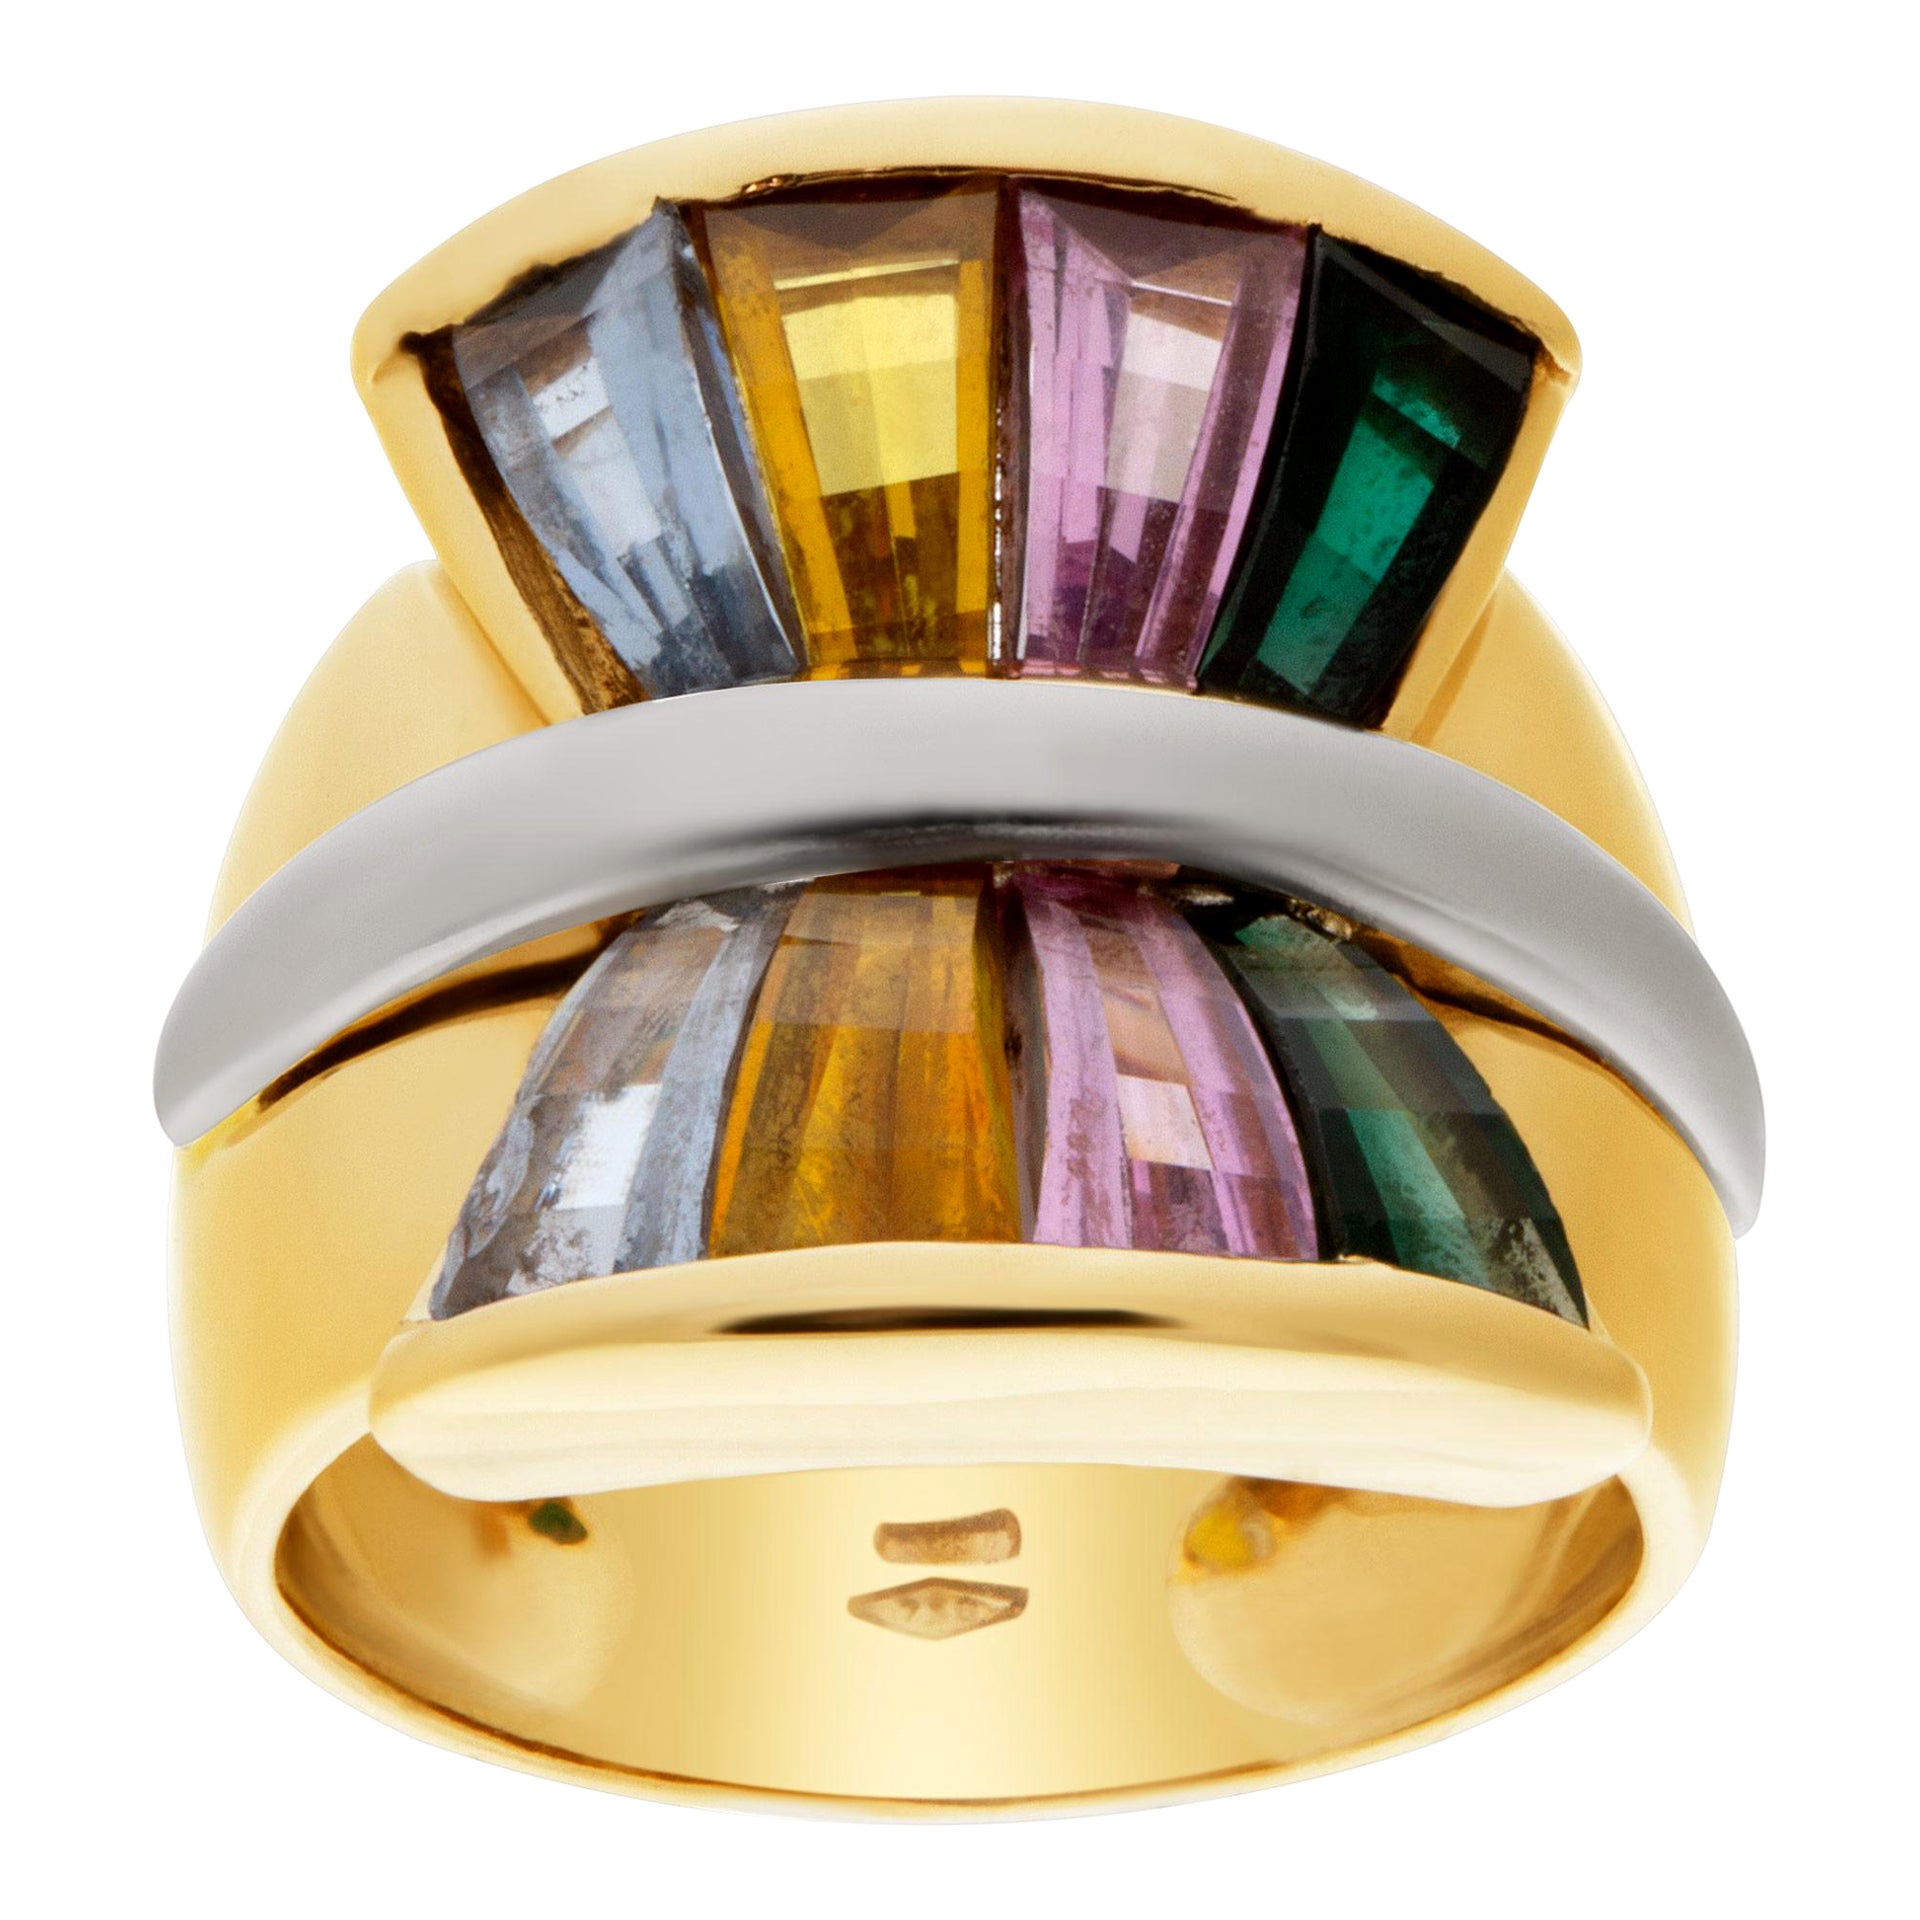 "Colorful Fan" Tapered Baguette Cut Colorful Semi-Precious Stone Ring in 14k For Sale